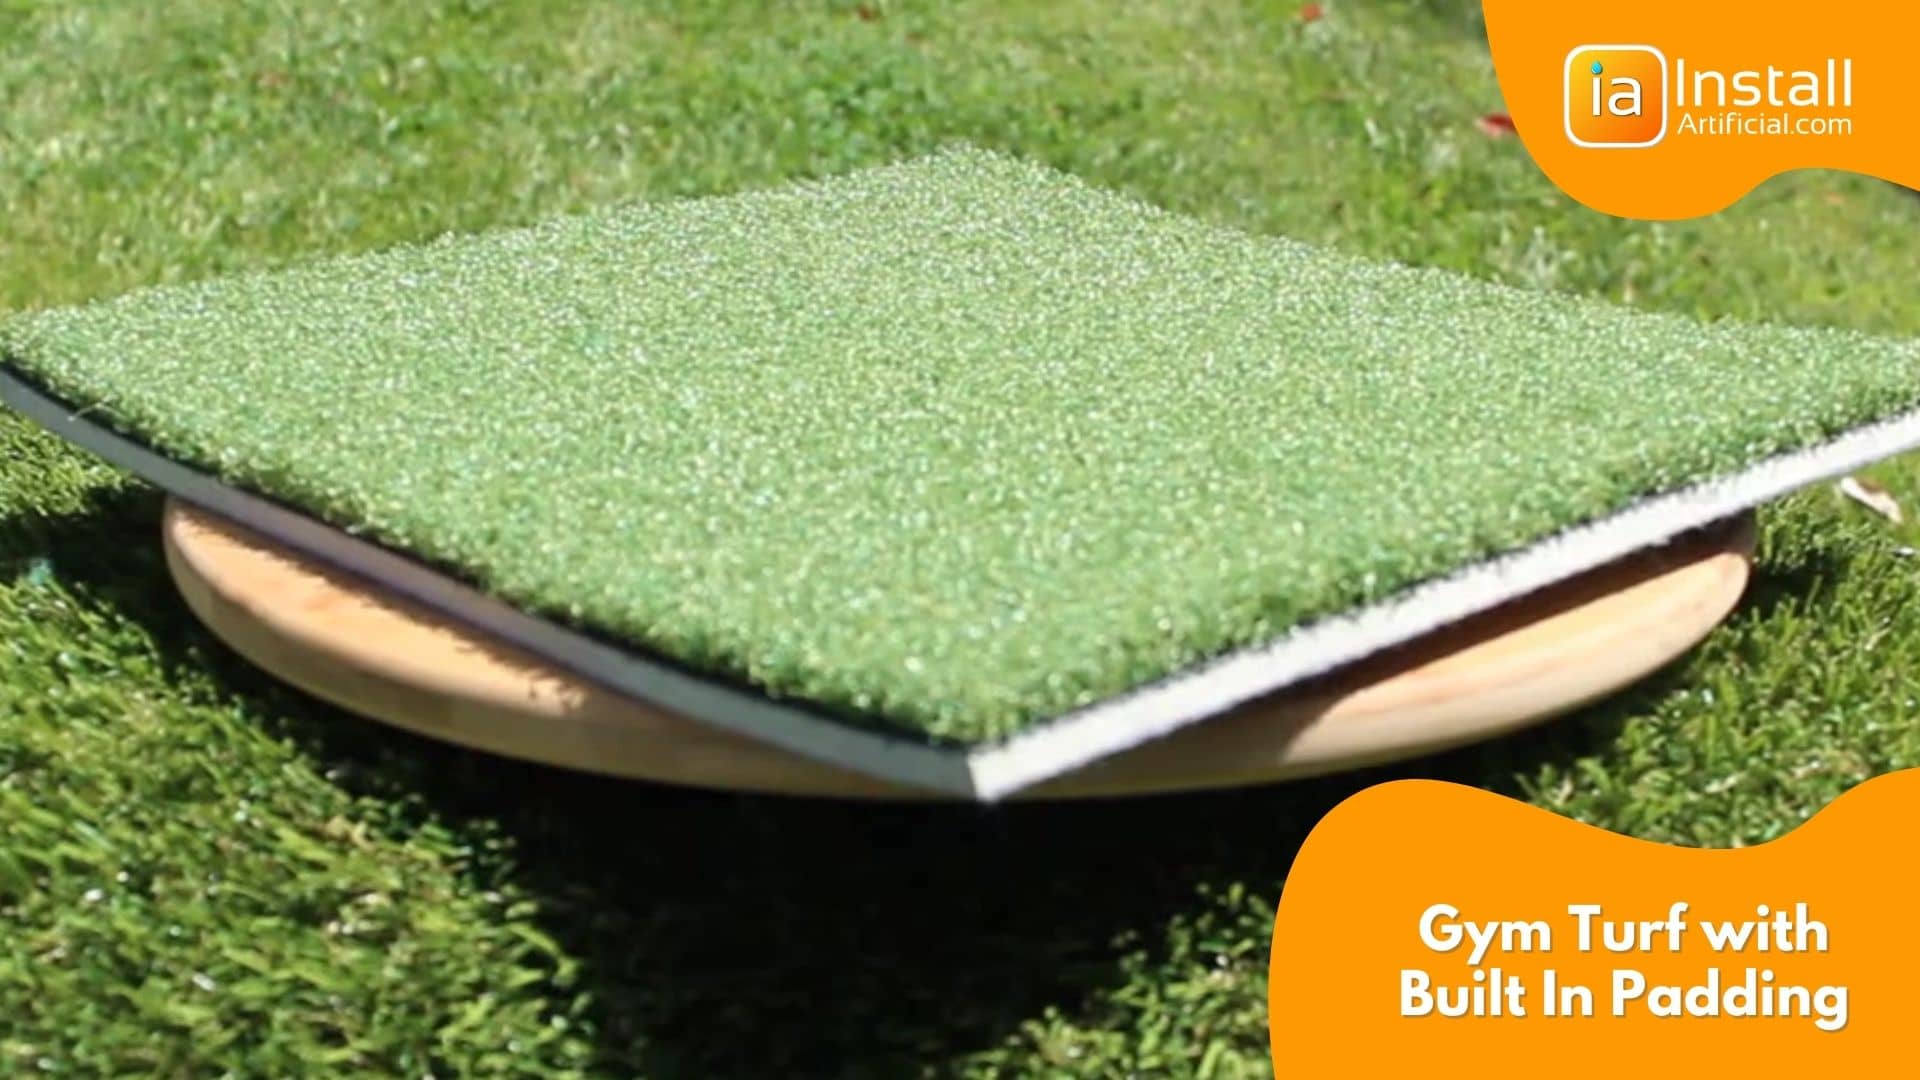 Sports turf for gyms with padding